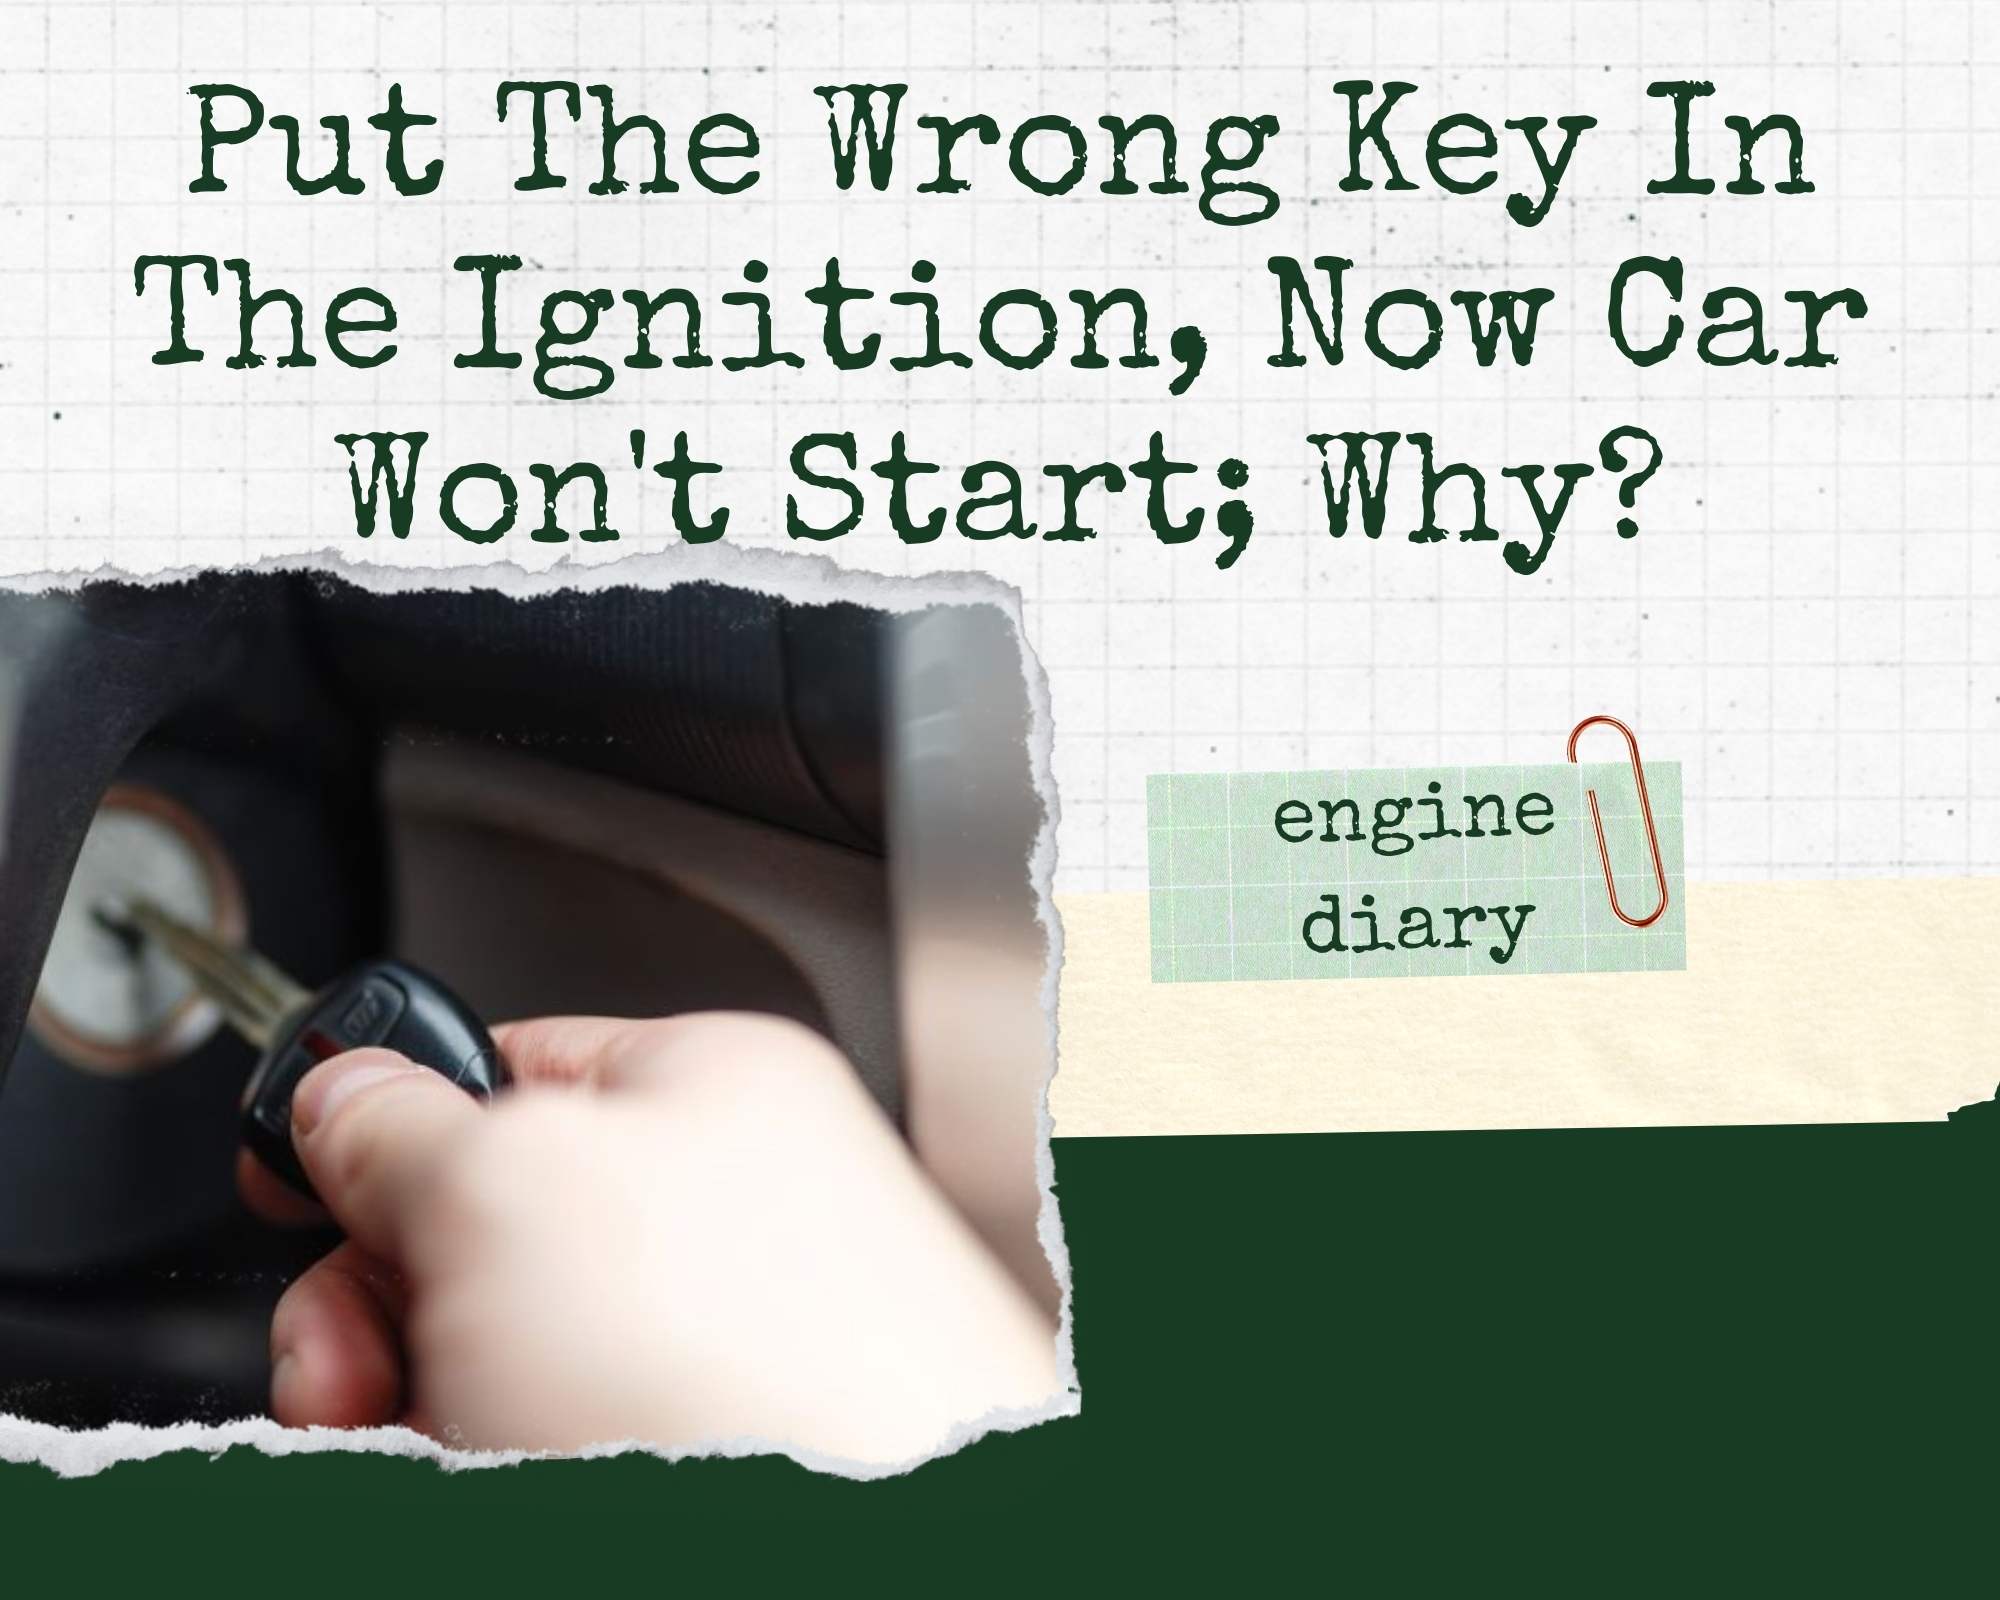 Put The Wrong Key In The Ignition Now Car Won't Start; Why?